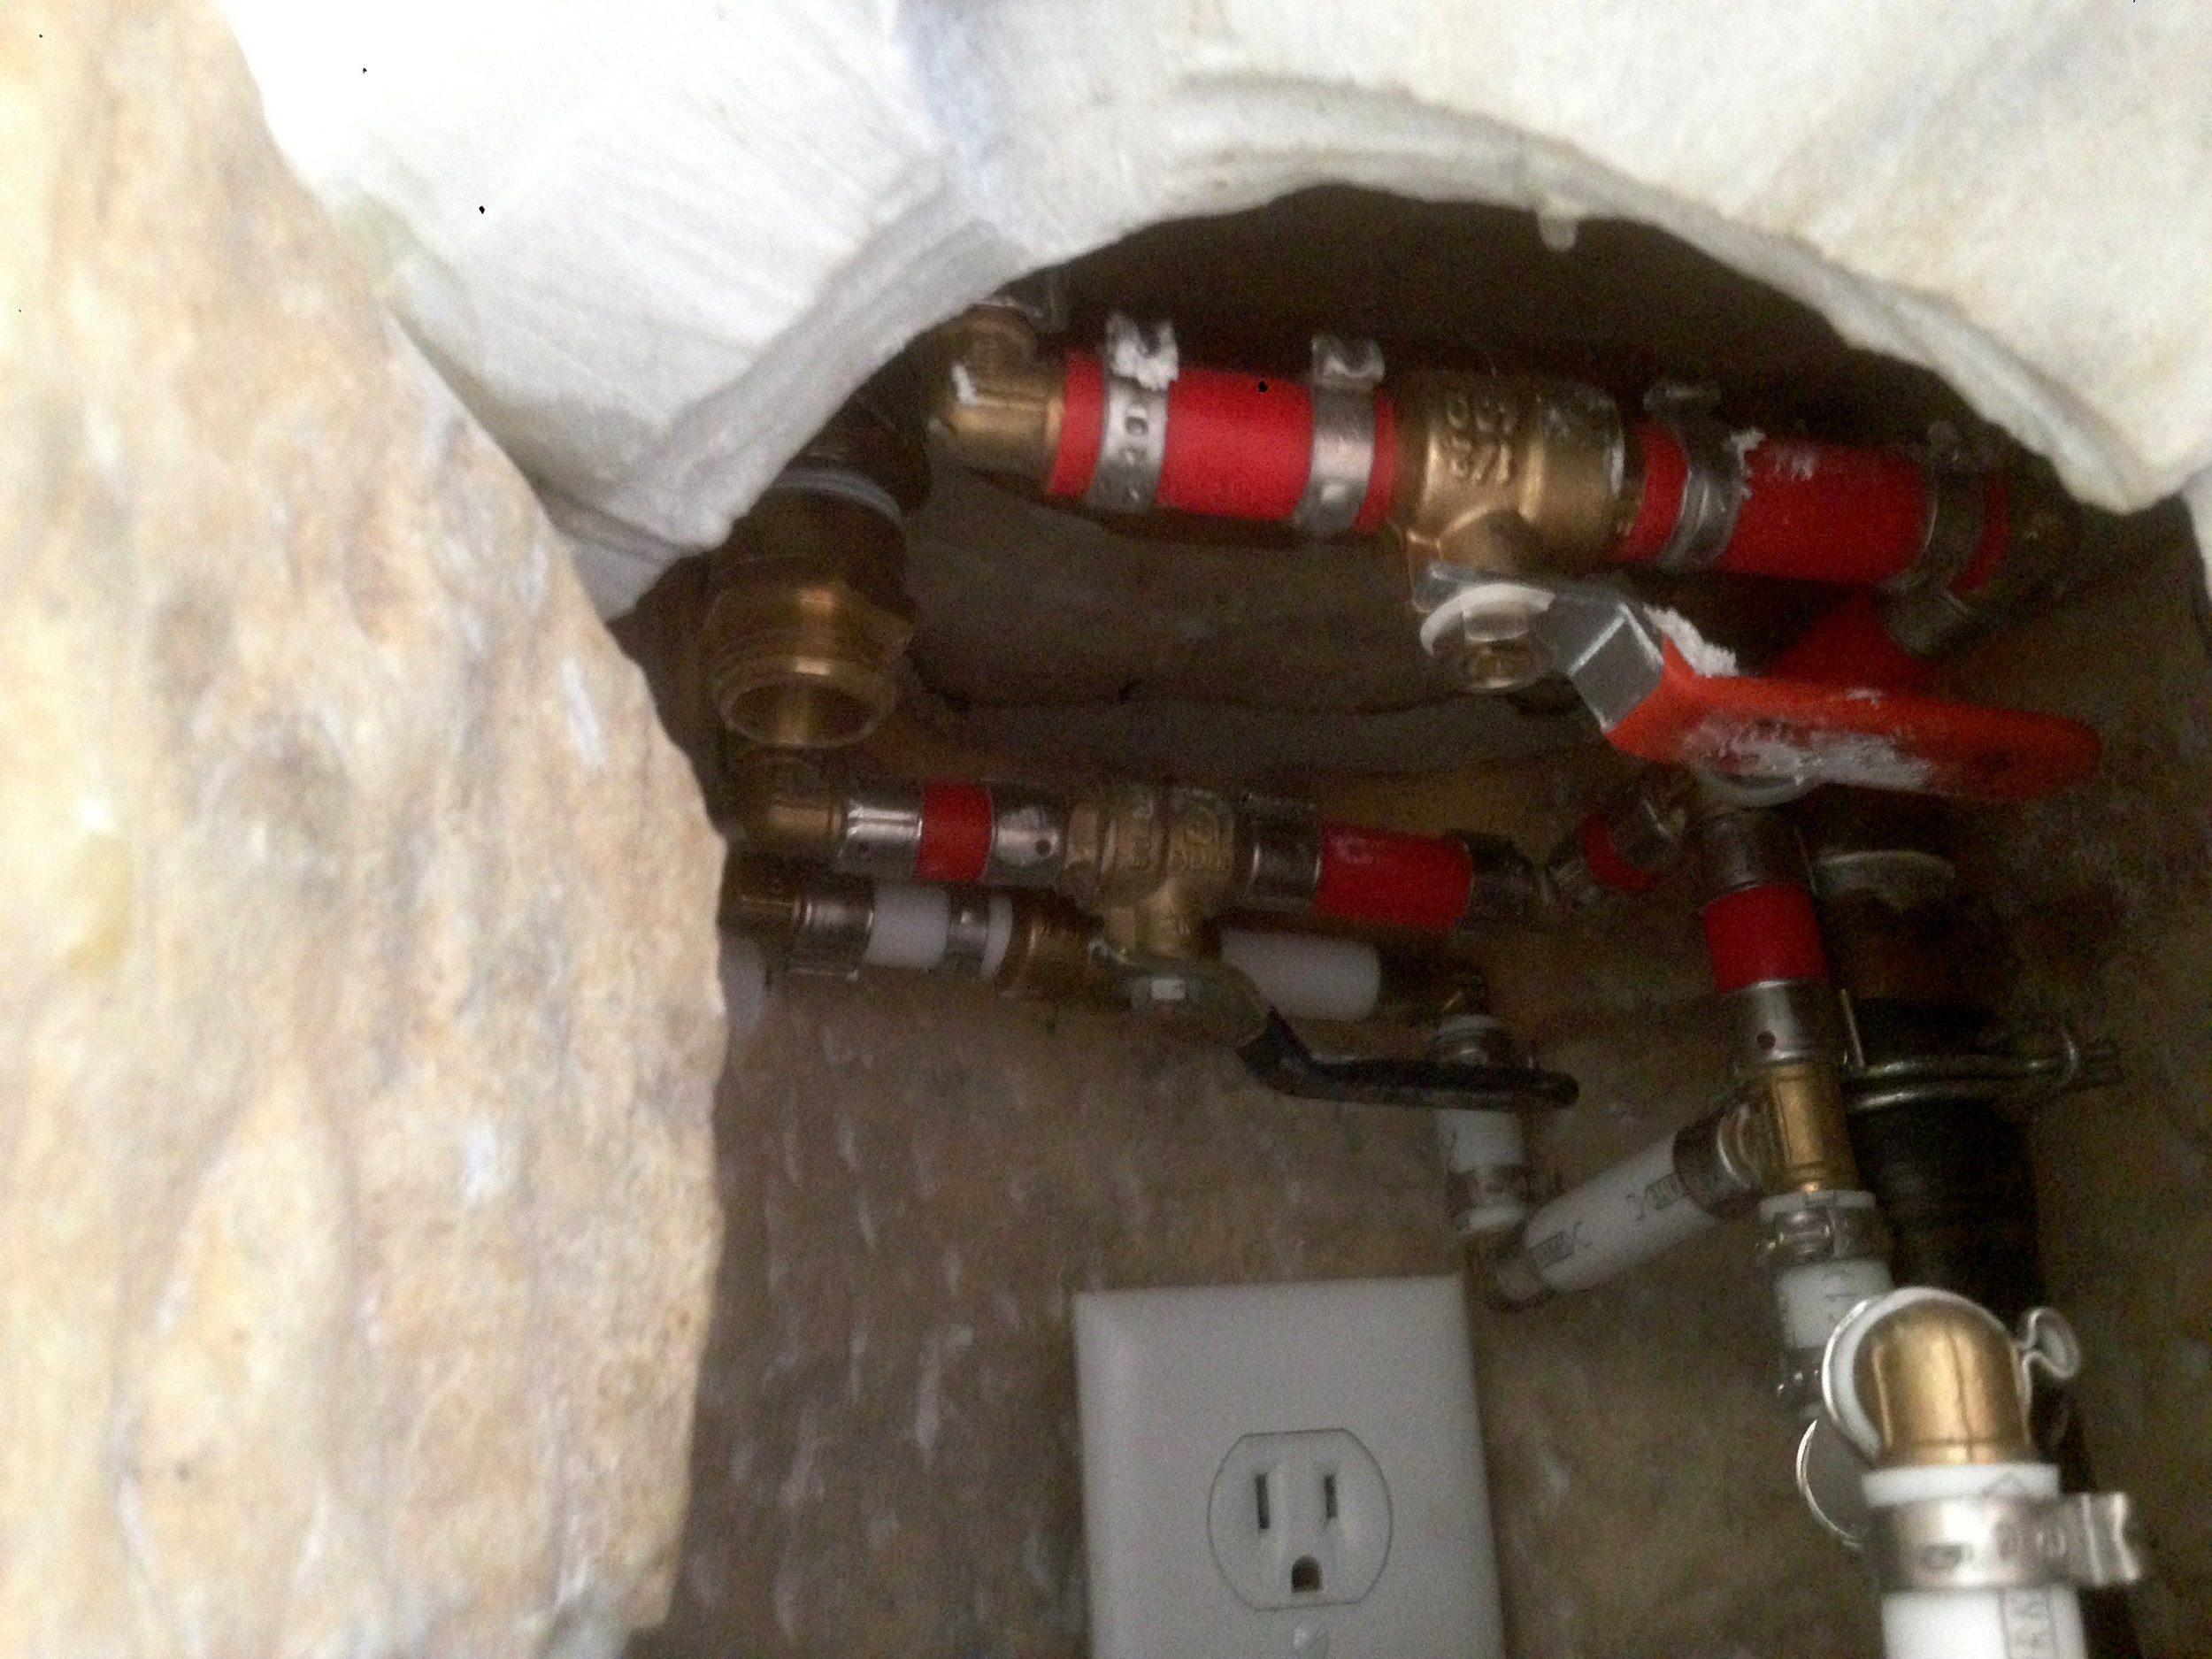  A peek inside the fountain base at the adjustable valves. Later a pump, filter and drain pipes were added. 